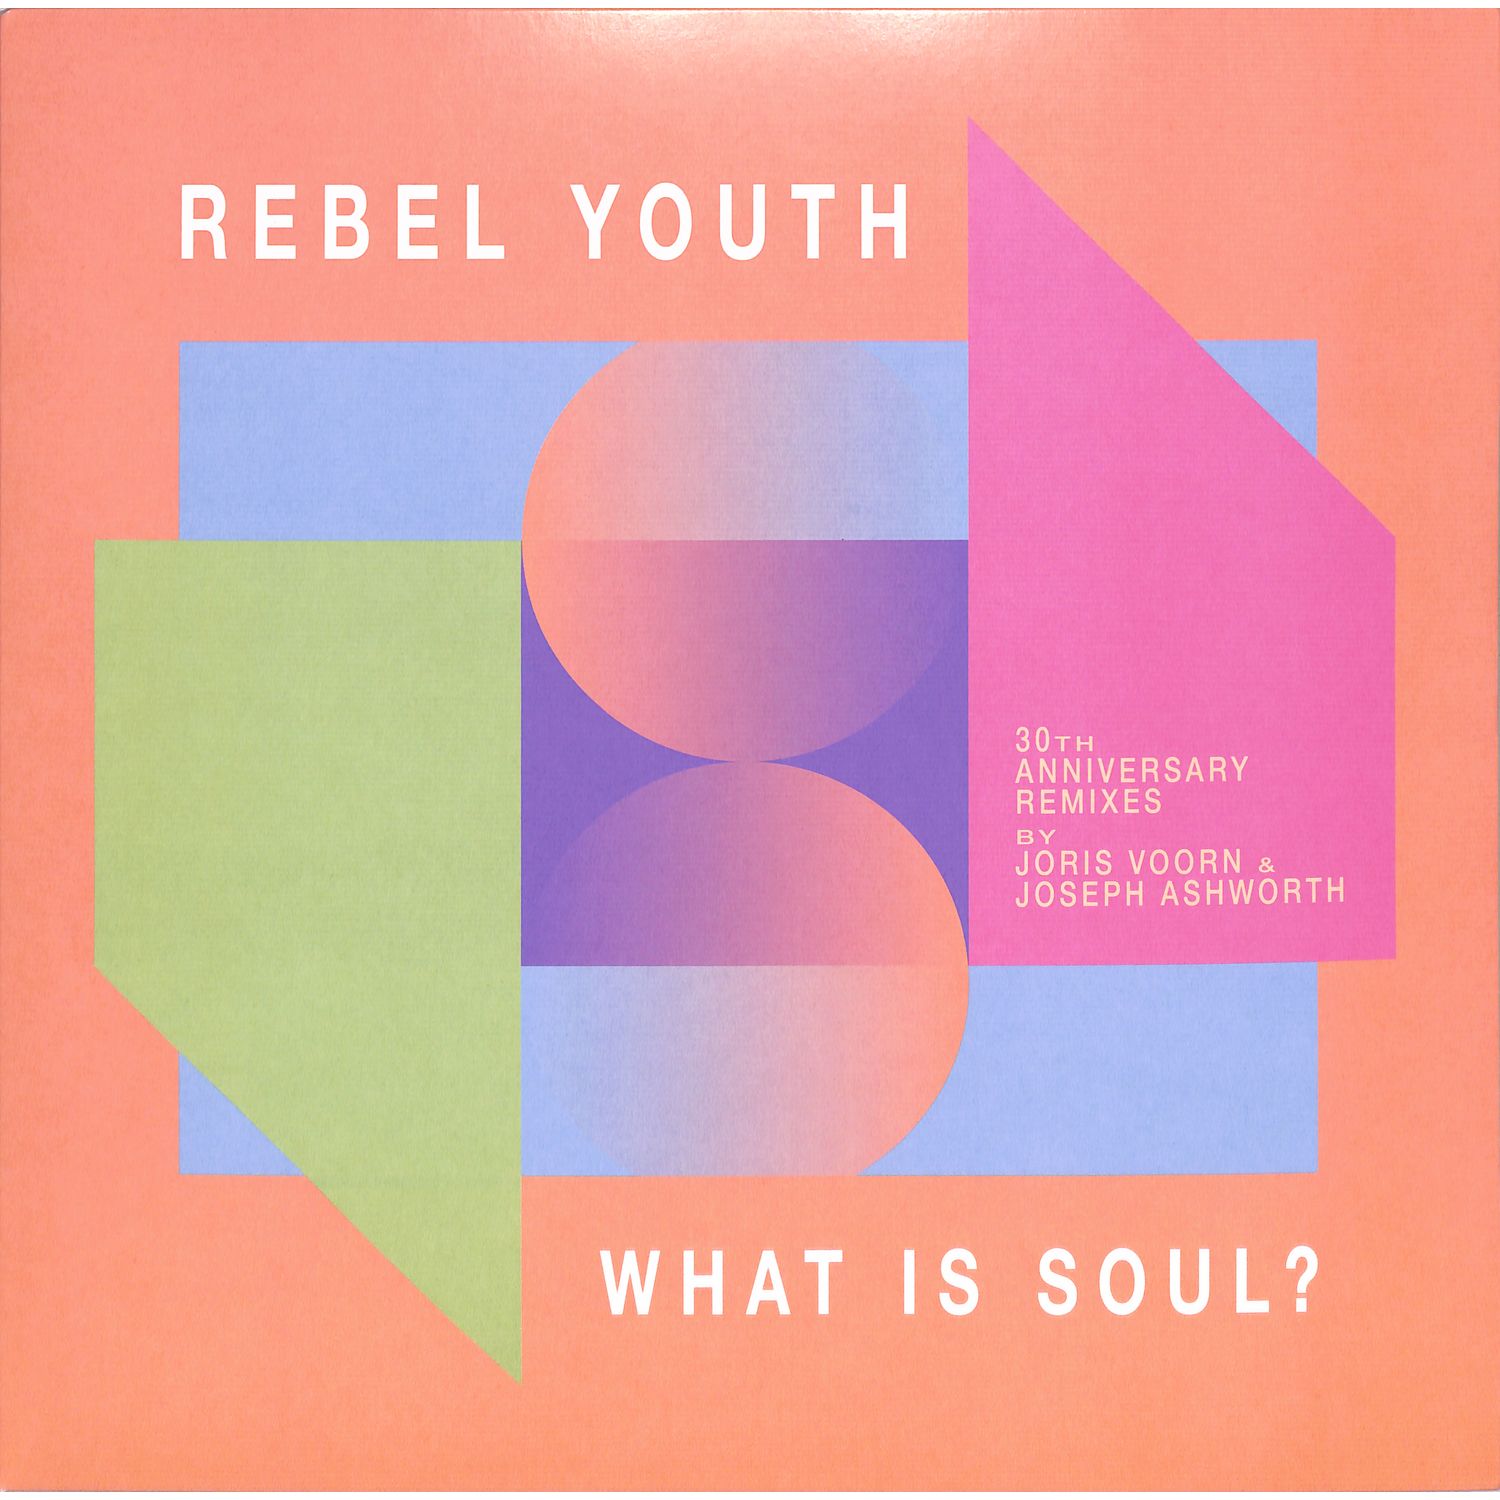 Rebel Youth - WHAT IS SOUL? 